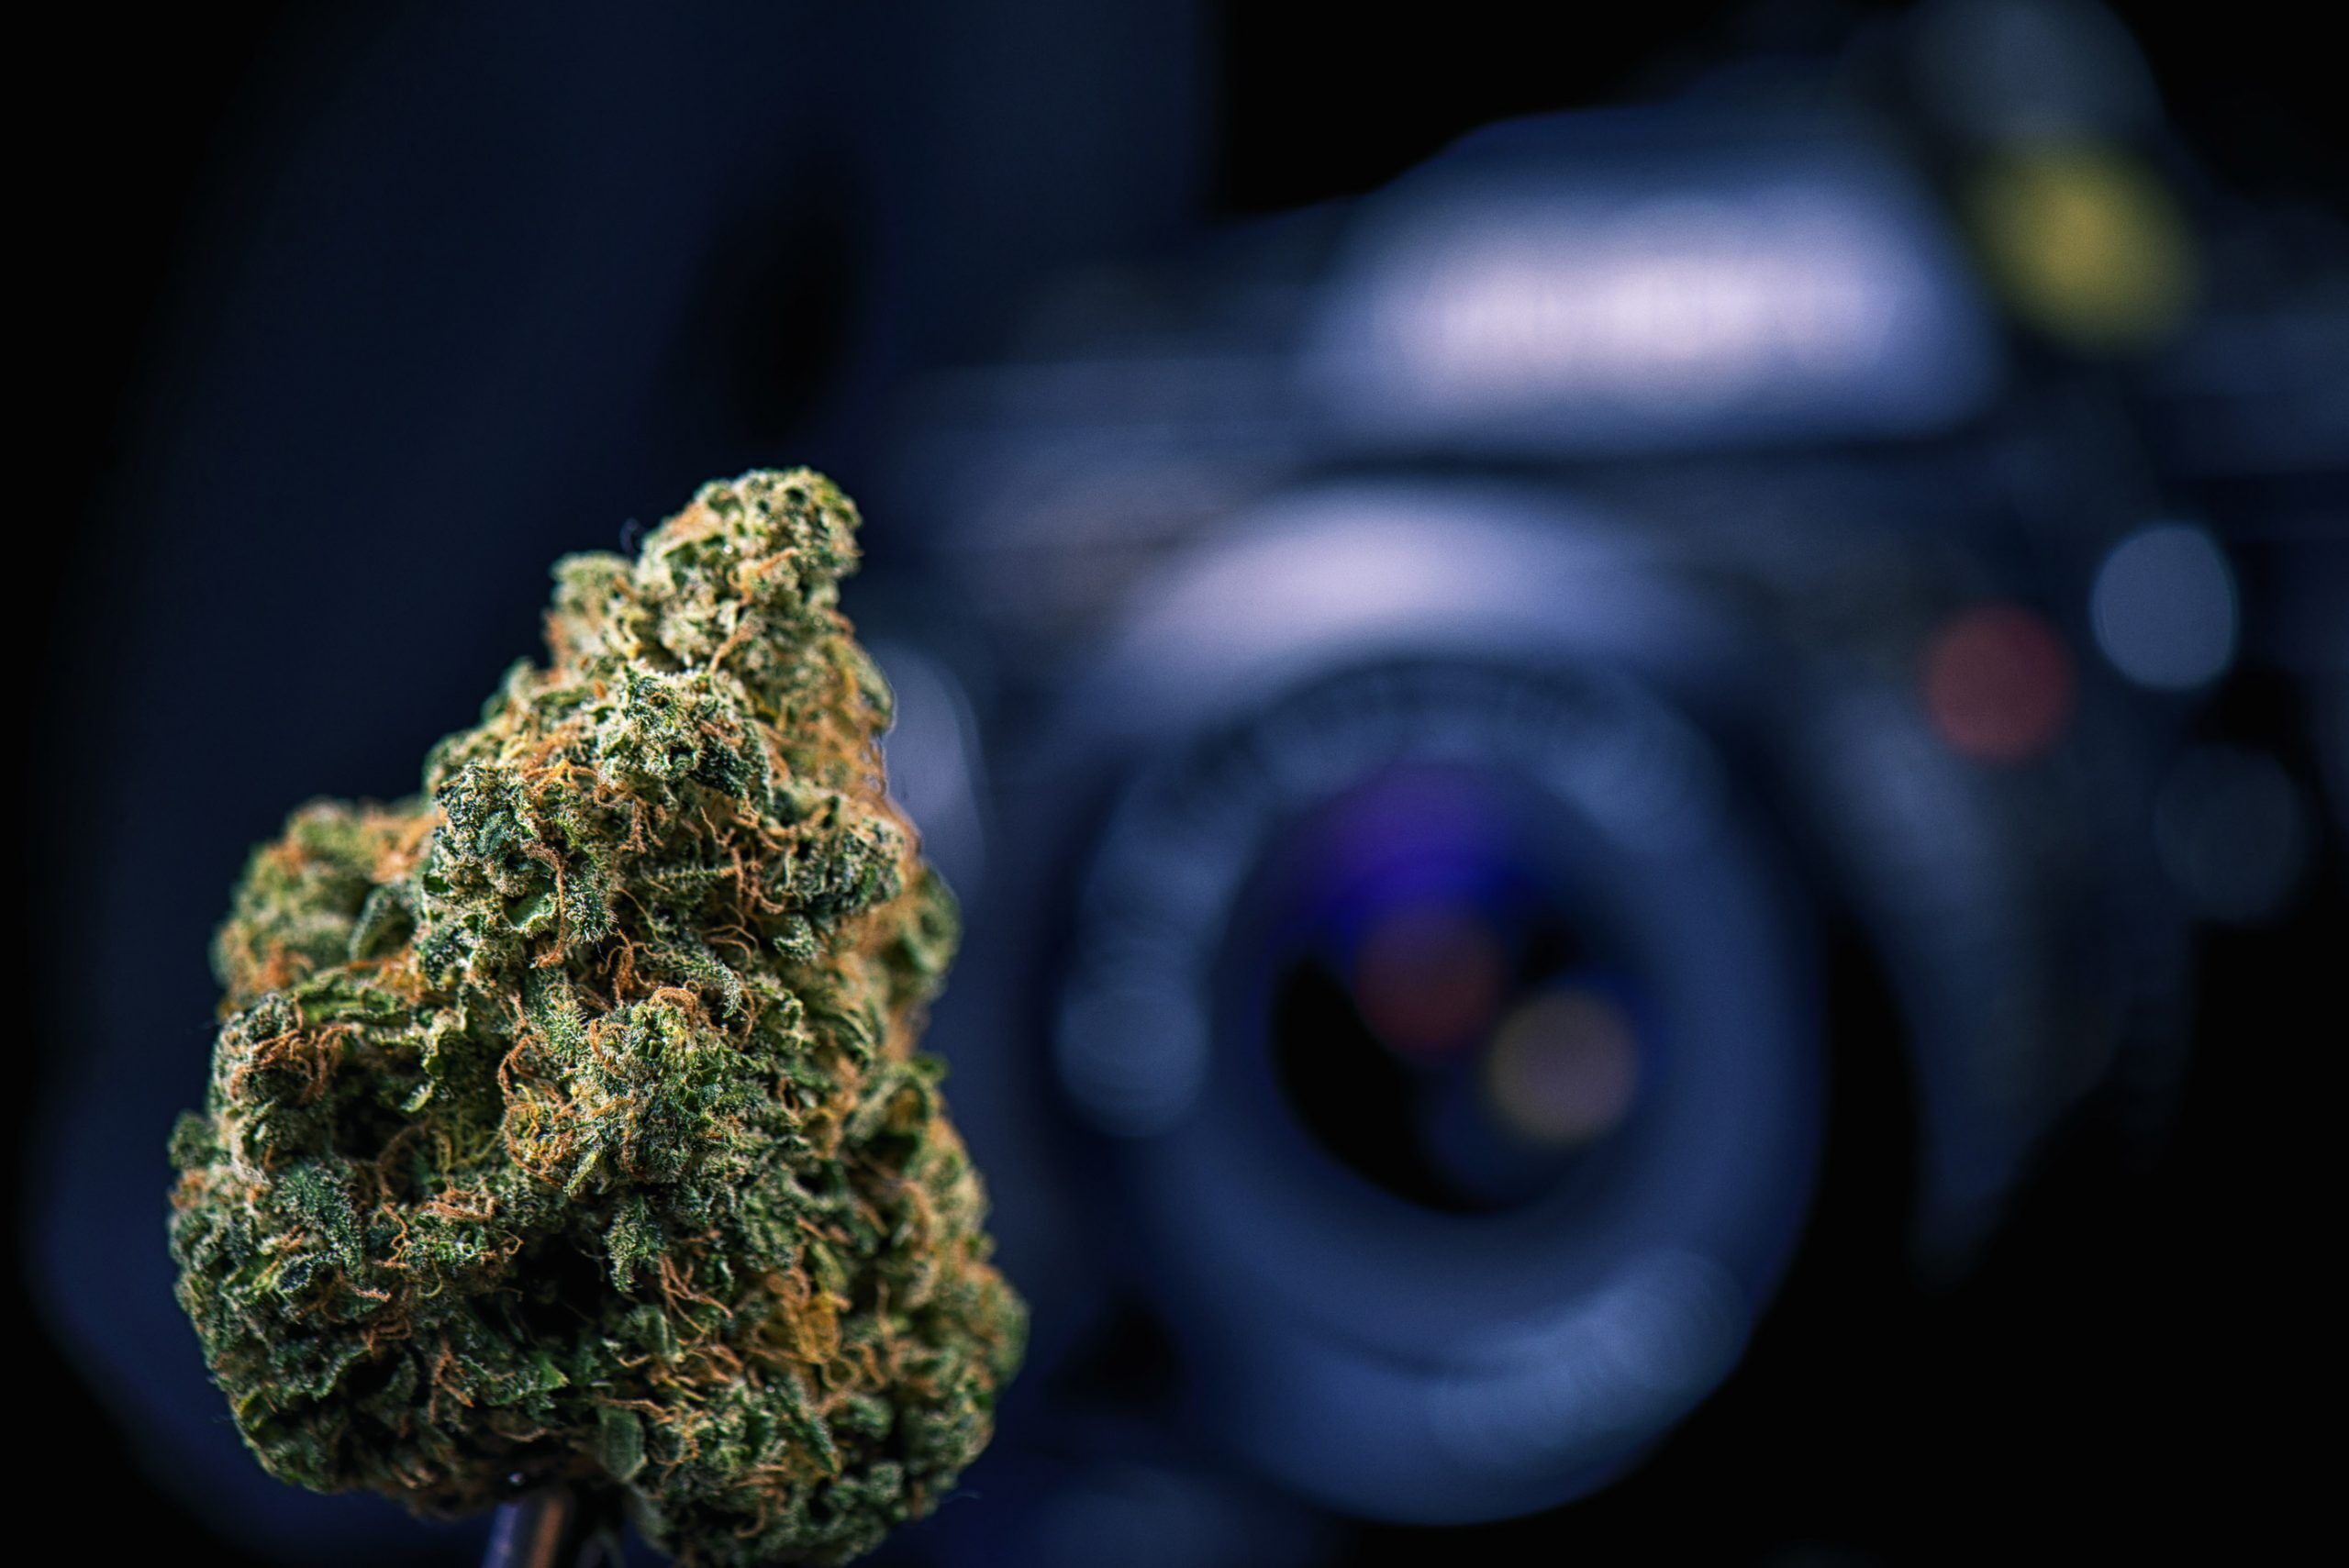 cannabis photography photo contest Dried cannabis bud in front of digital camera lens - marijuana photography concept